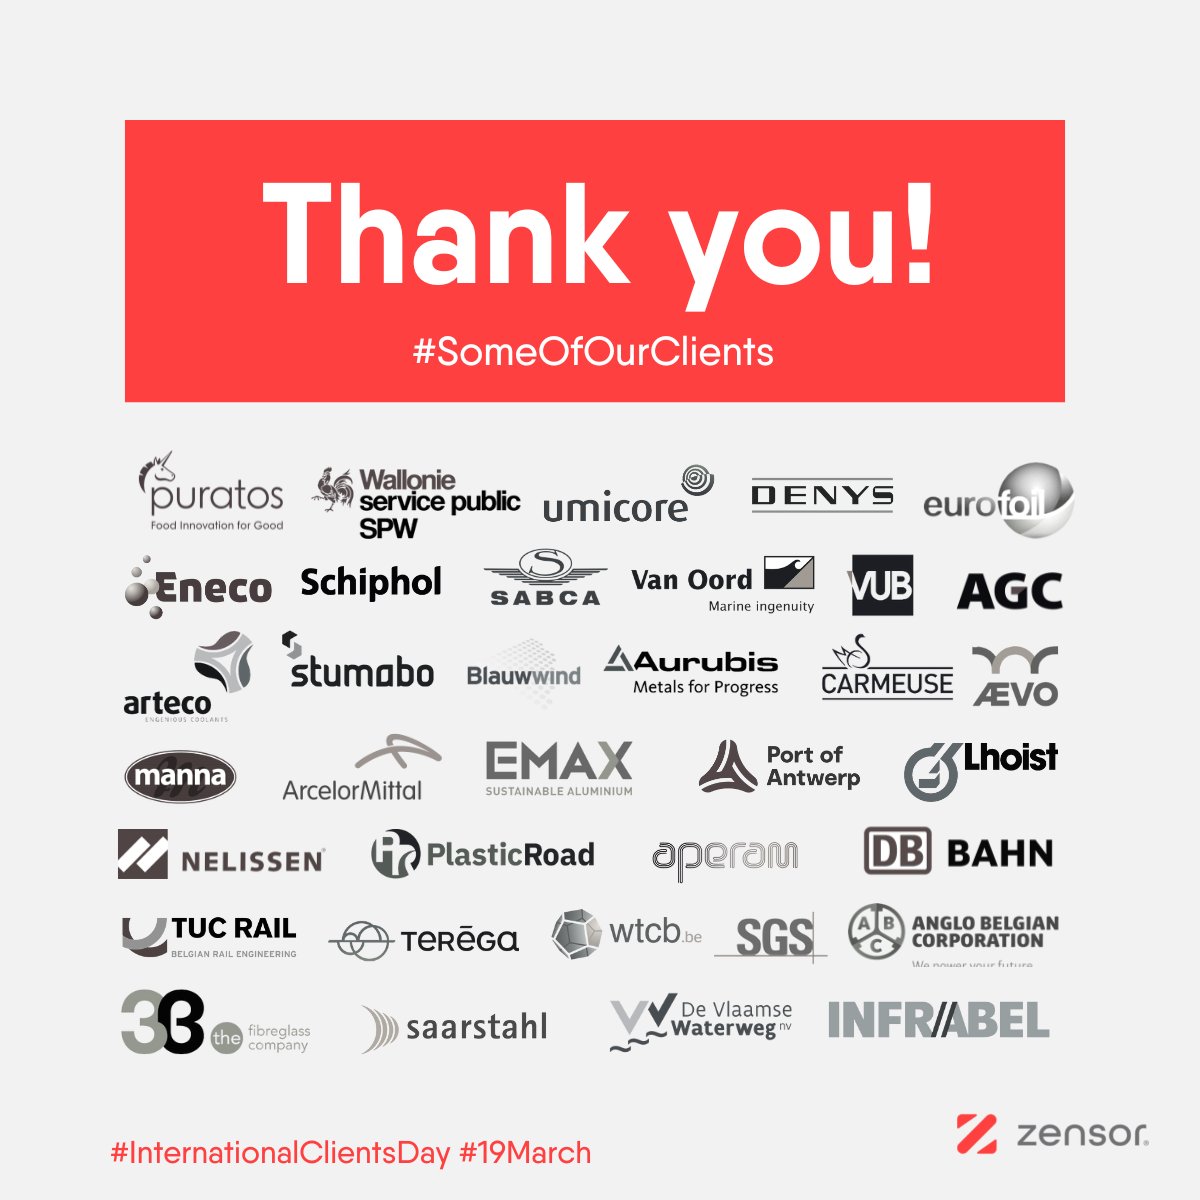 As we approach #internationalclientsday on March 19th, we at Zensor want to take this opportunity to express our gratitude towards our esteemed customers.

Thank you for choosing us as your asset and infrastructure monitoring partner 💓

#AssetMonitoring #InfrastructureMonitoring